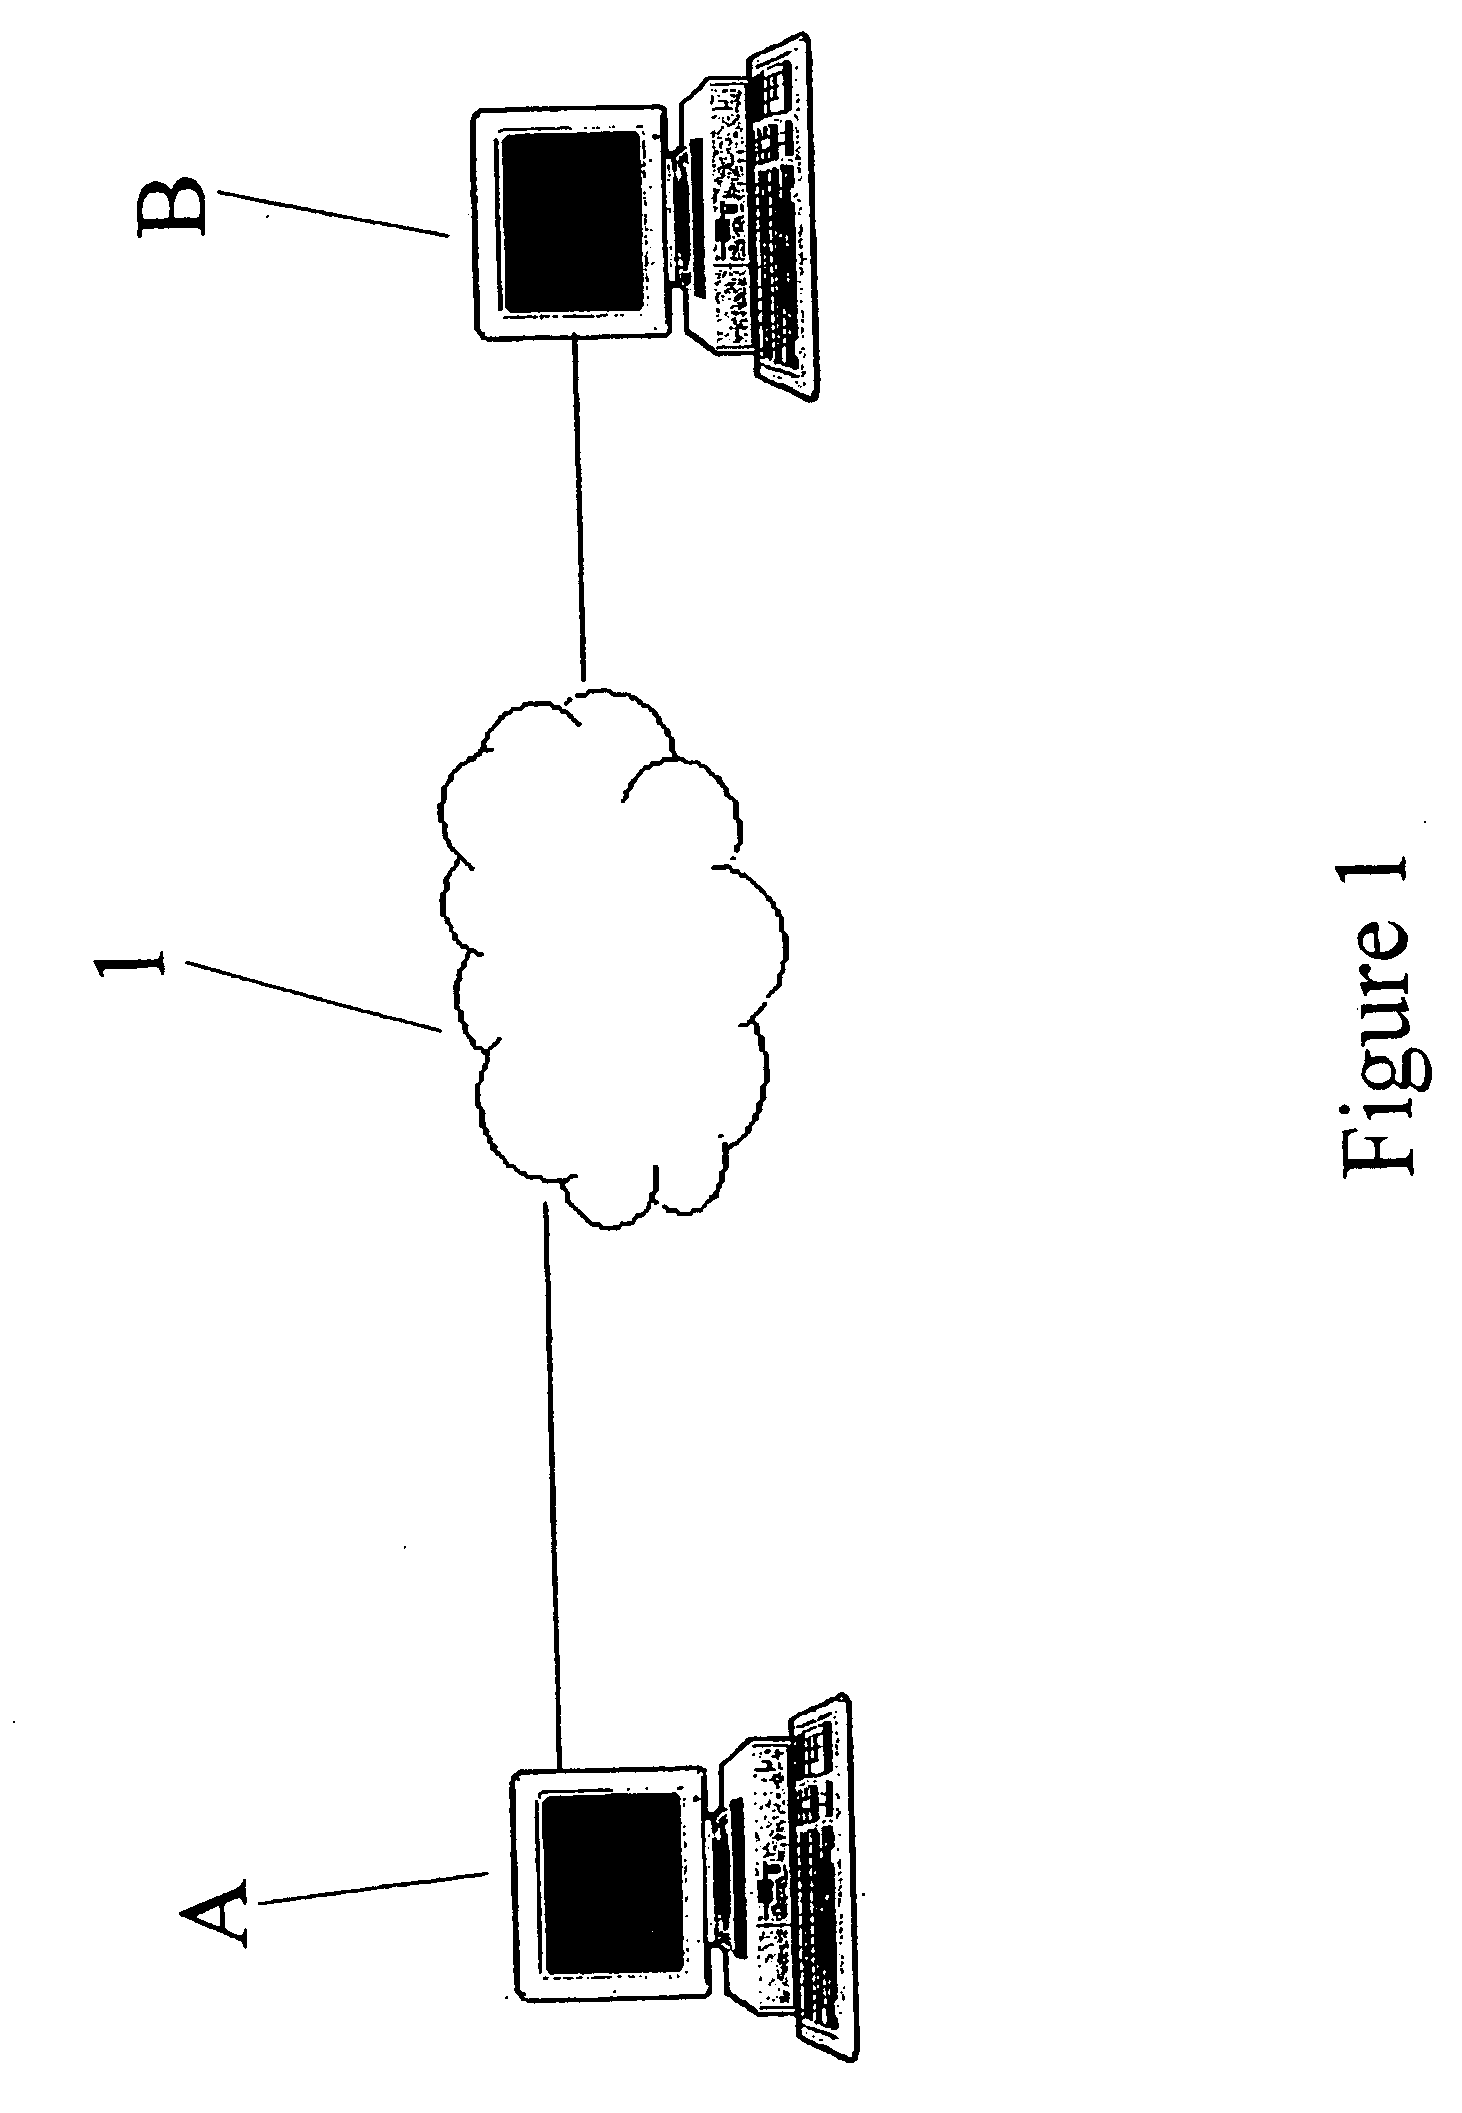 Method of determining a timing offset between a first clock and a second clock in a communications network